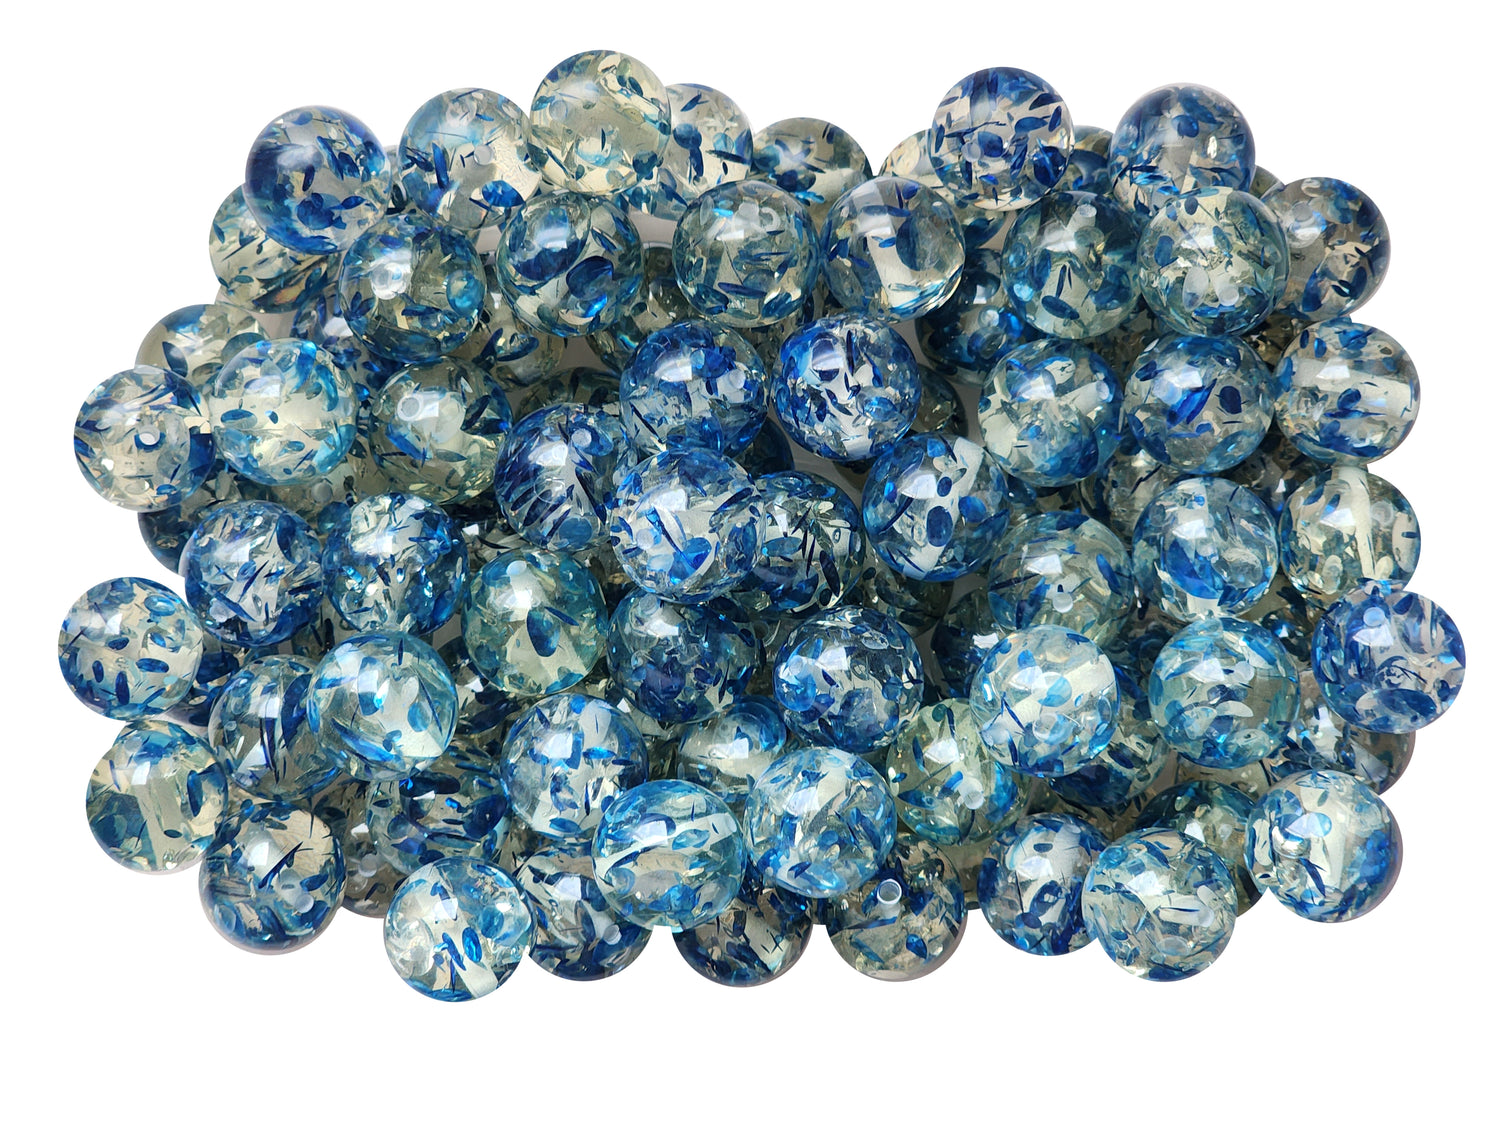 blue stained glass 20mm wholesale bubblegum beads